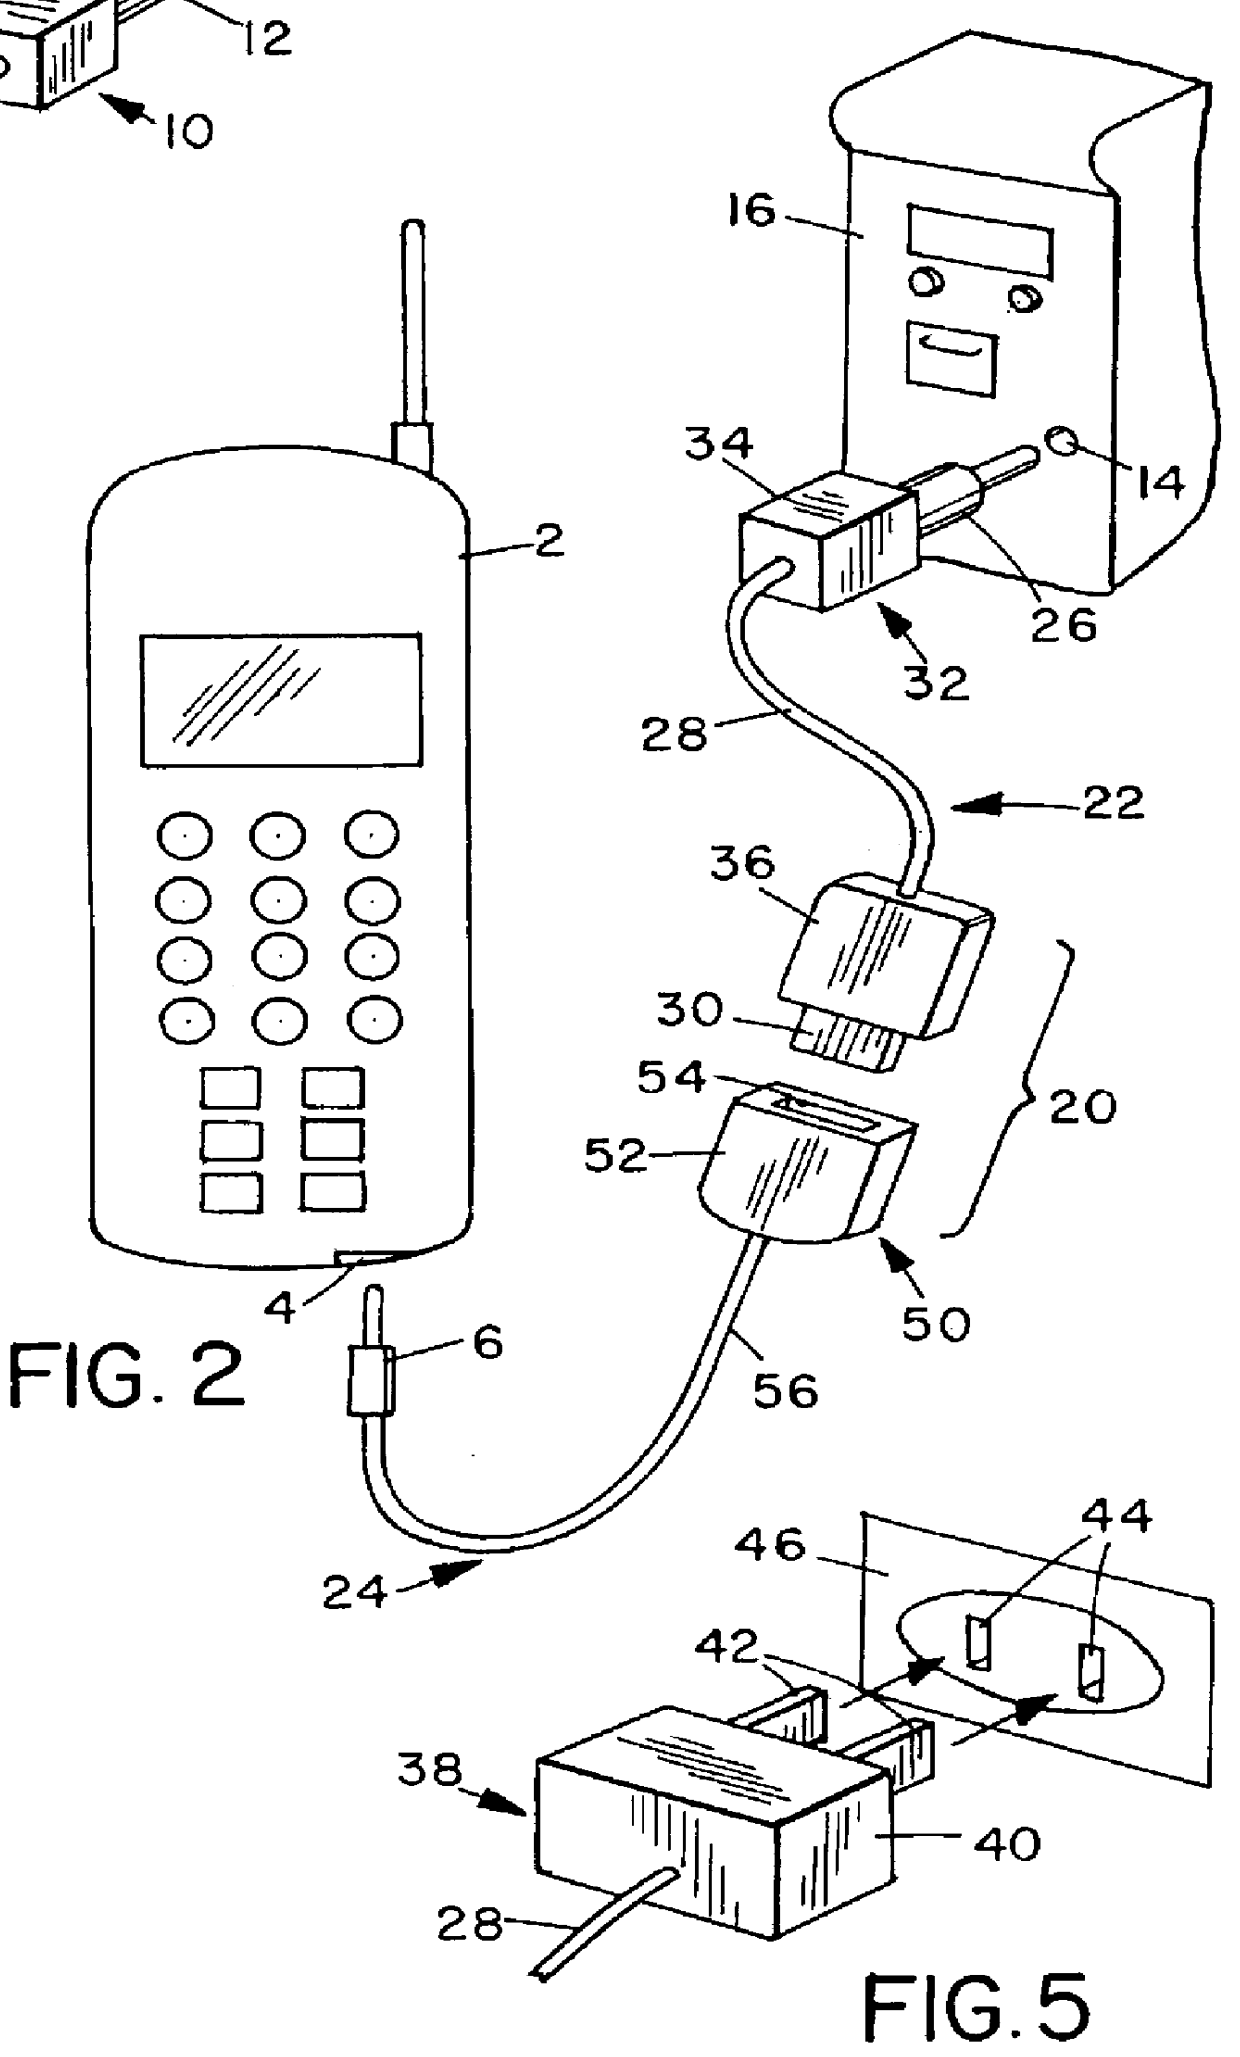 Two-part battery charger/power cable article with multiple device capability